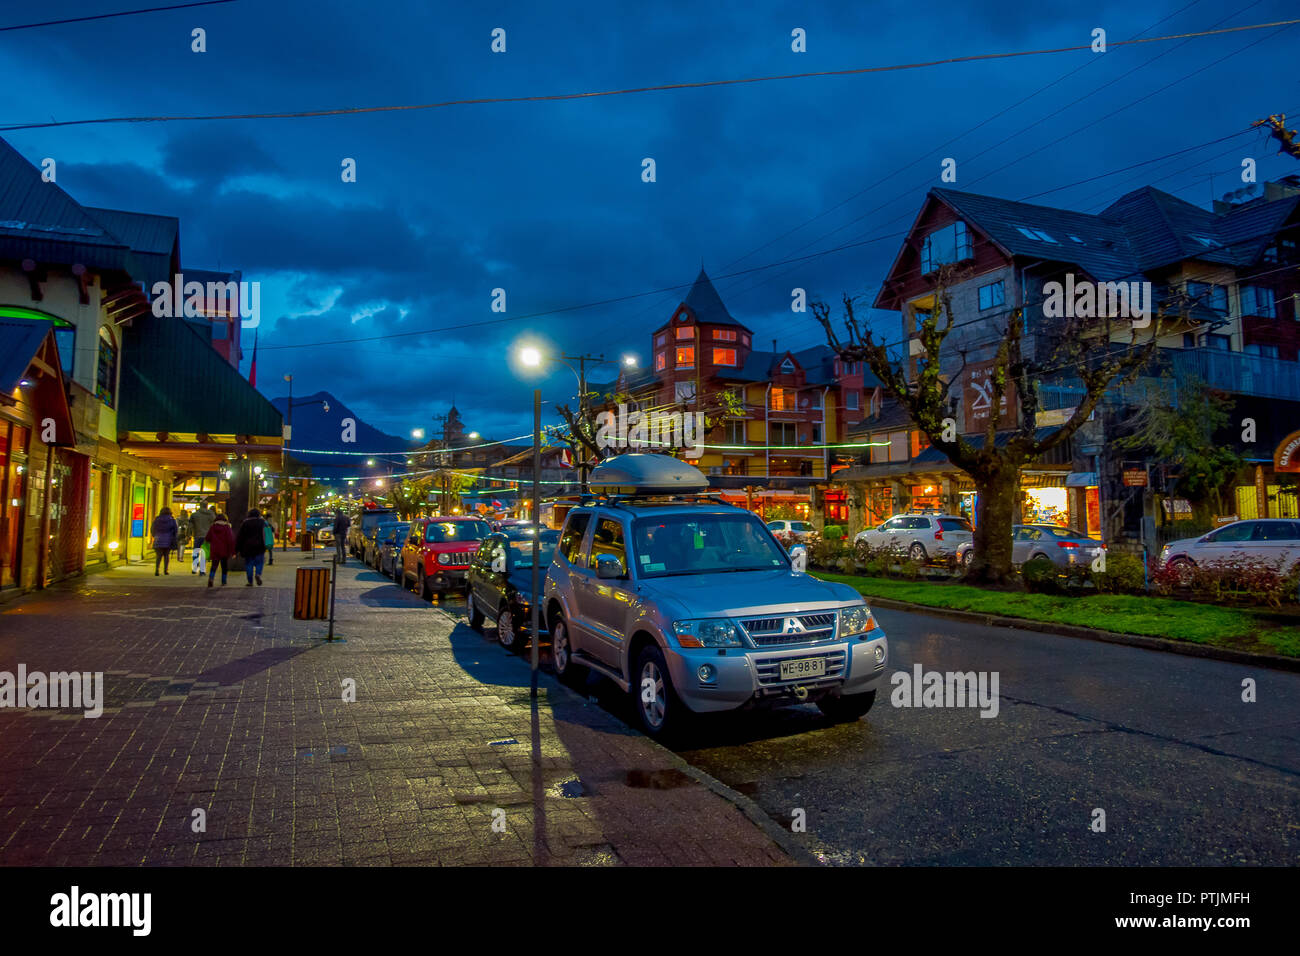 PUCON, CHILE - SEPTEMBER, 23, 2018: Outdoor view of cars parked in a row in the streets of the city in Pucon at night Stock Photo